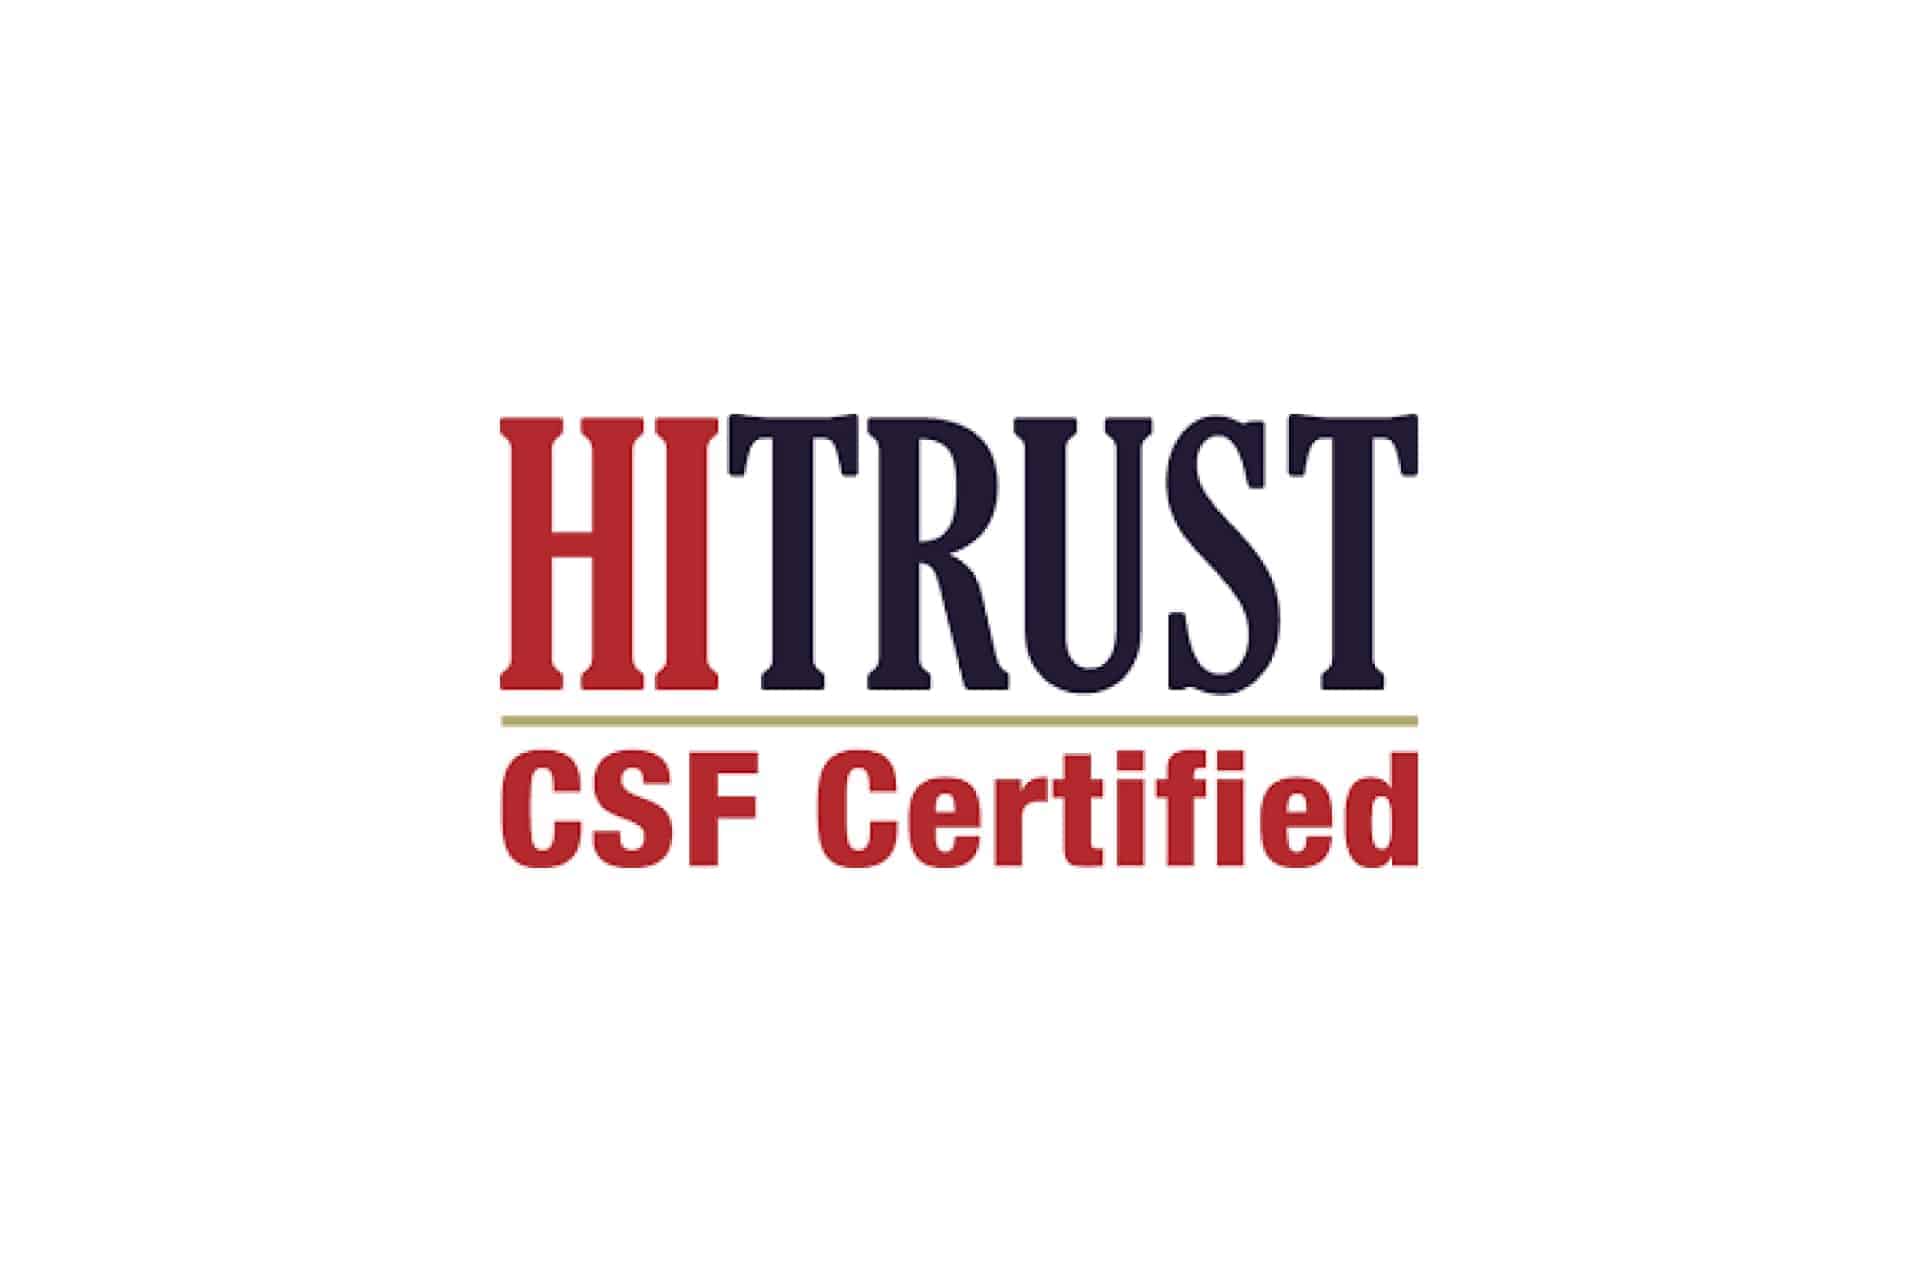 HITRUST v11: Path to Certification Is Now 45% Faster 